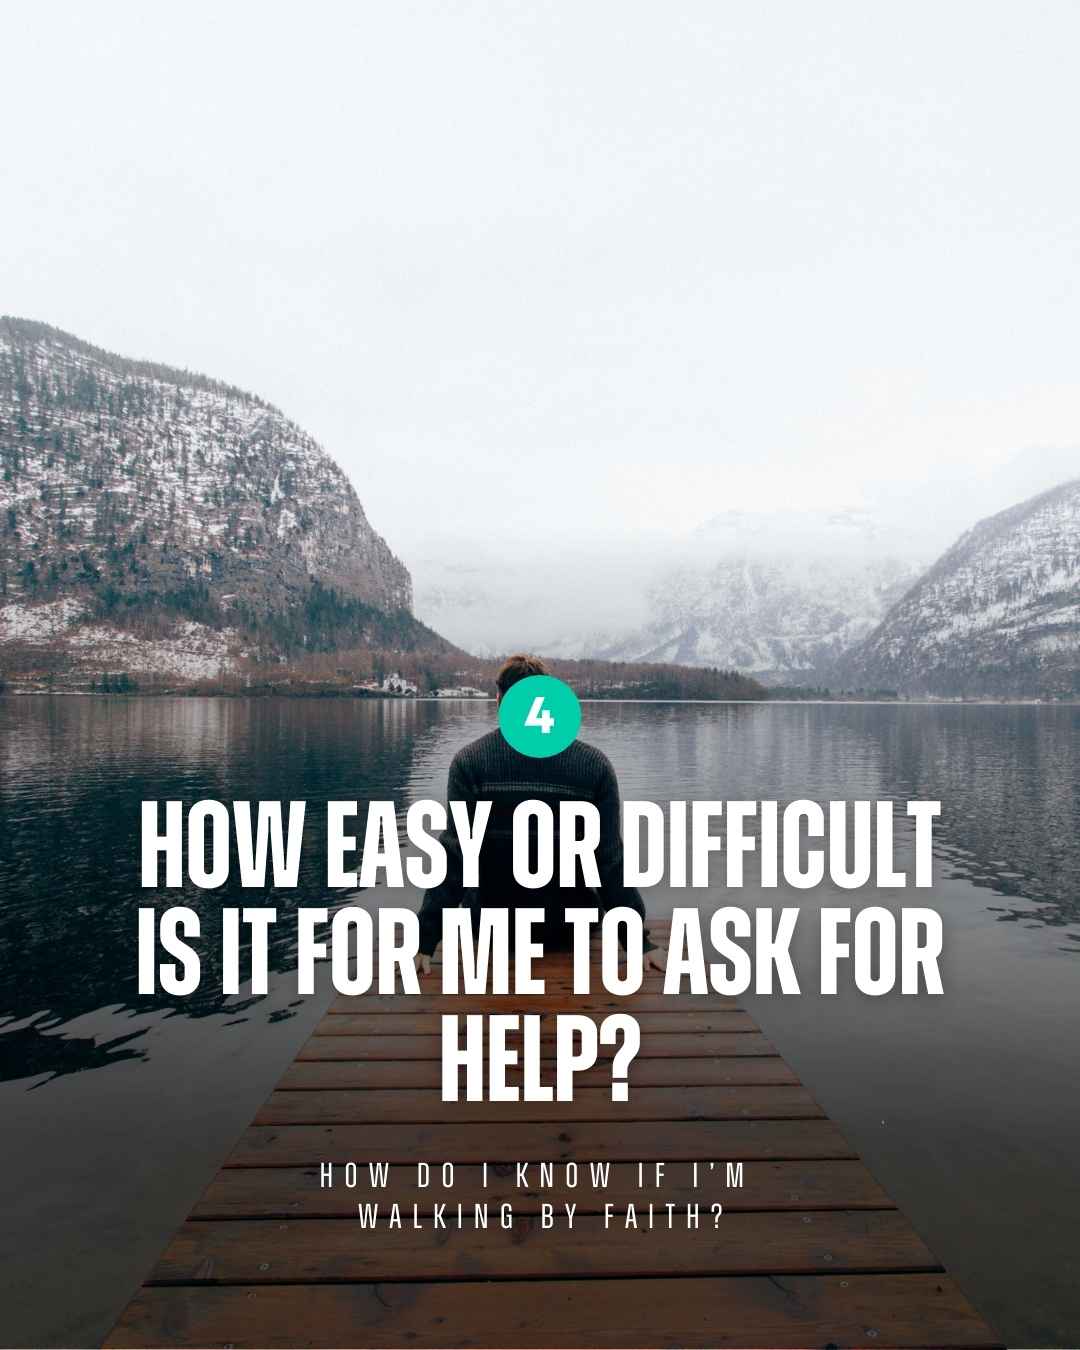 Walk by faith - How easy or difficult is it for me to ask for help?